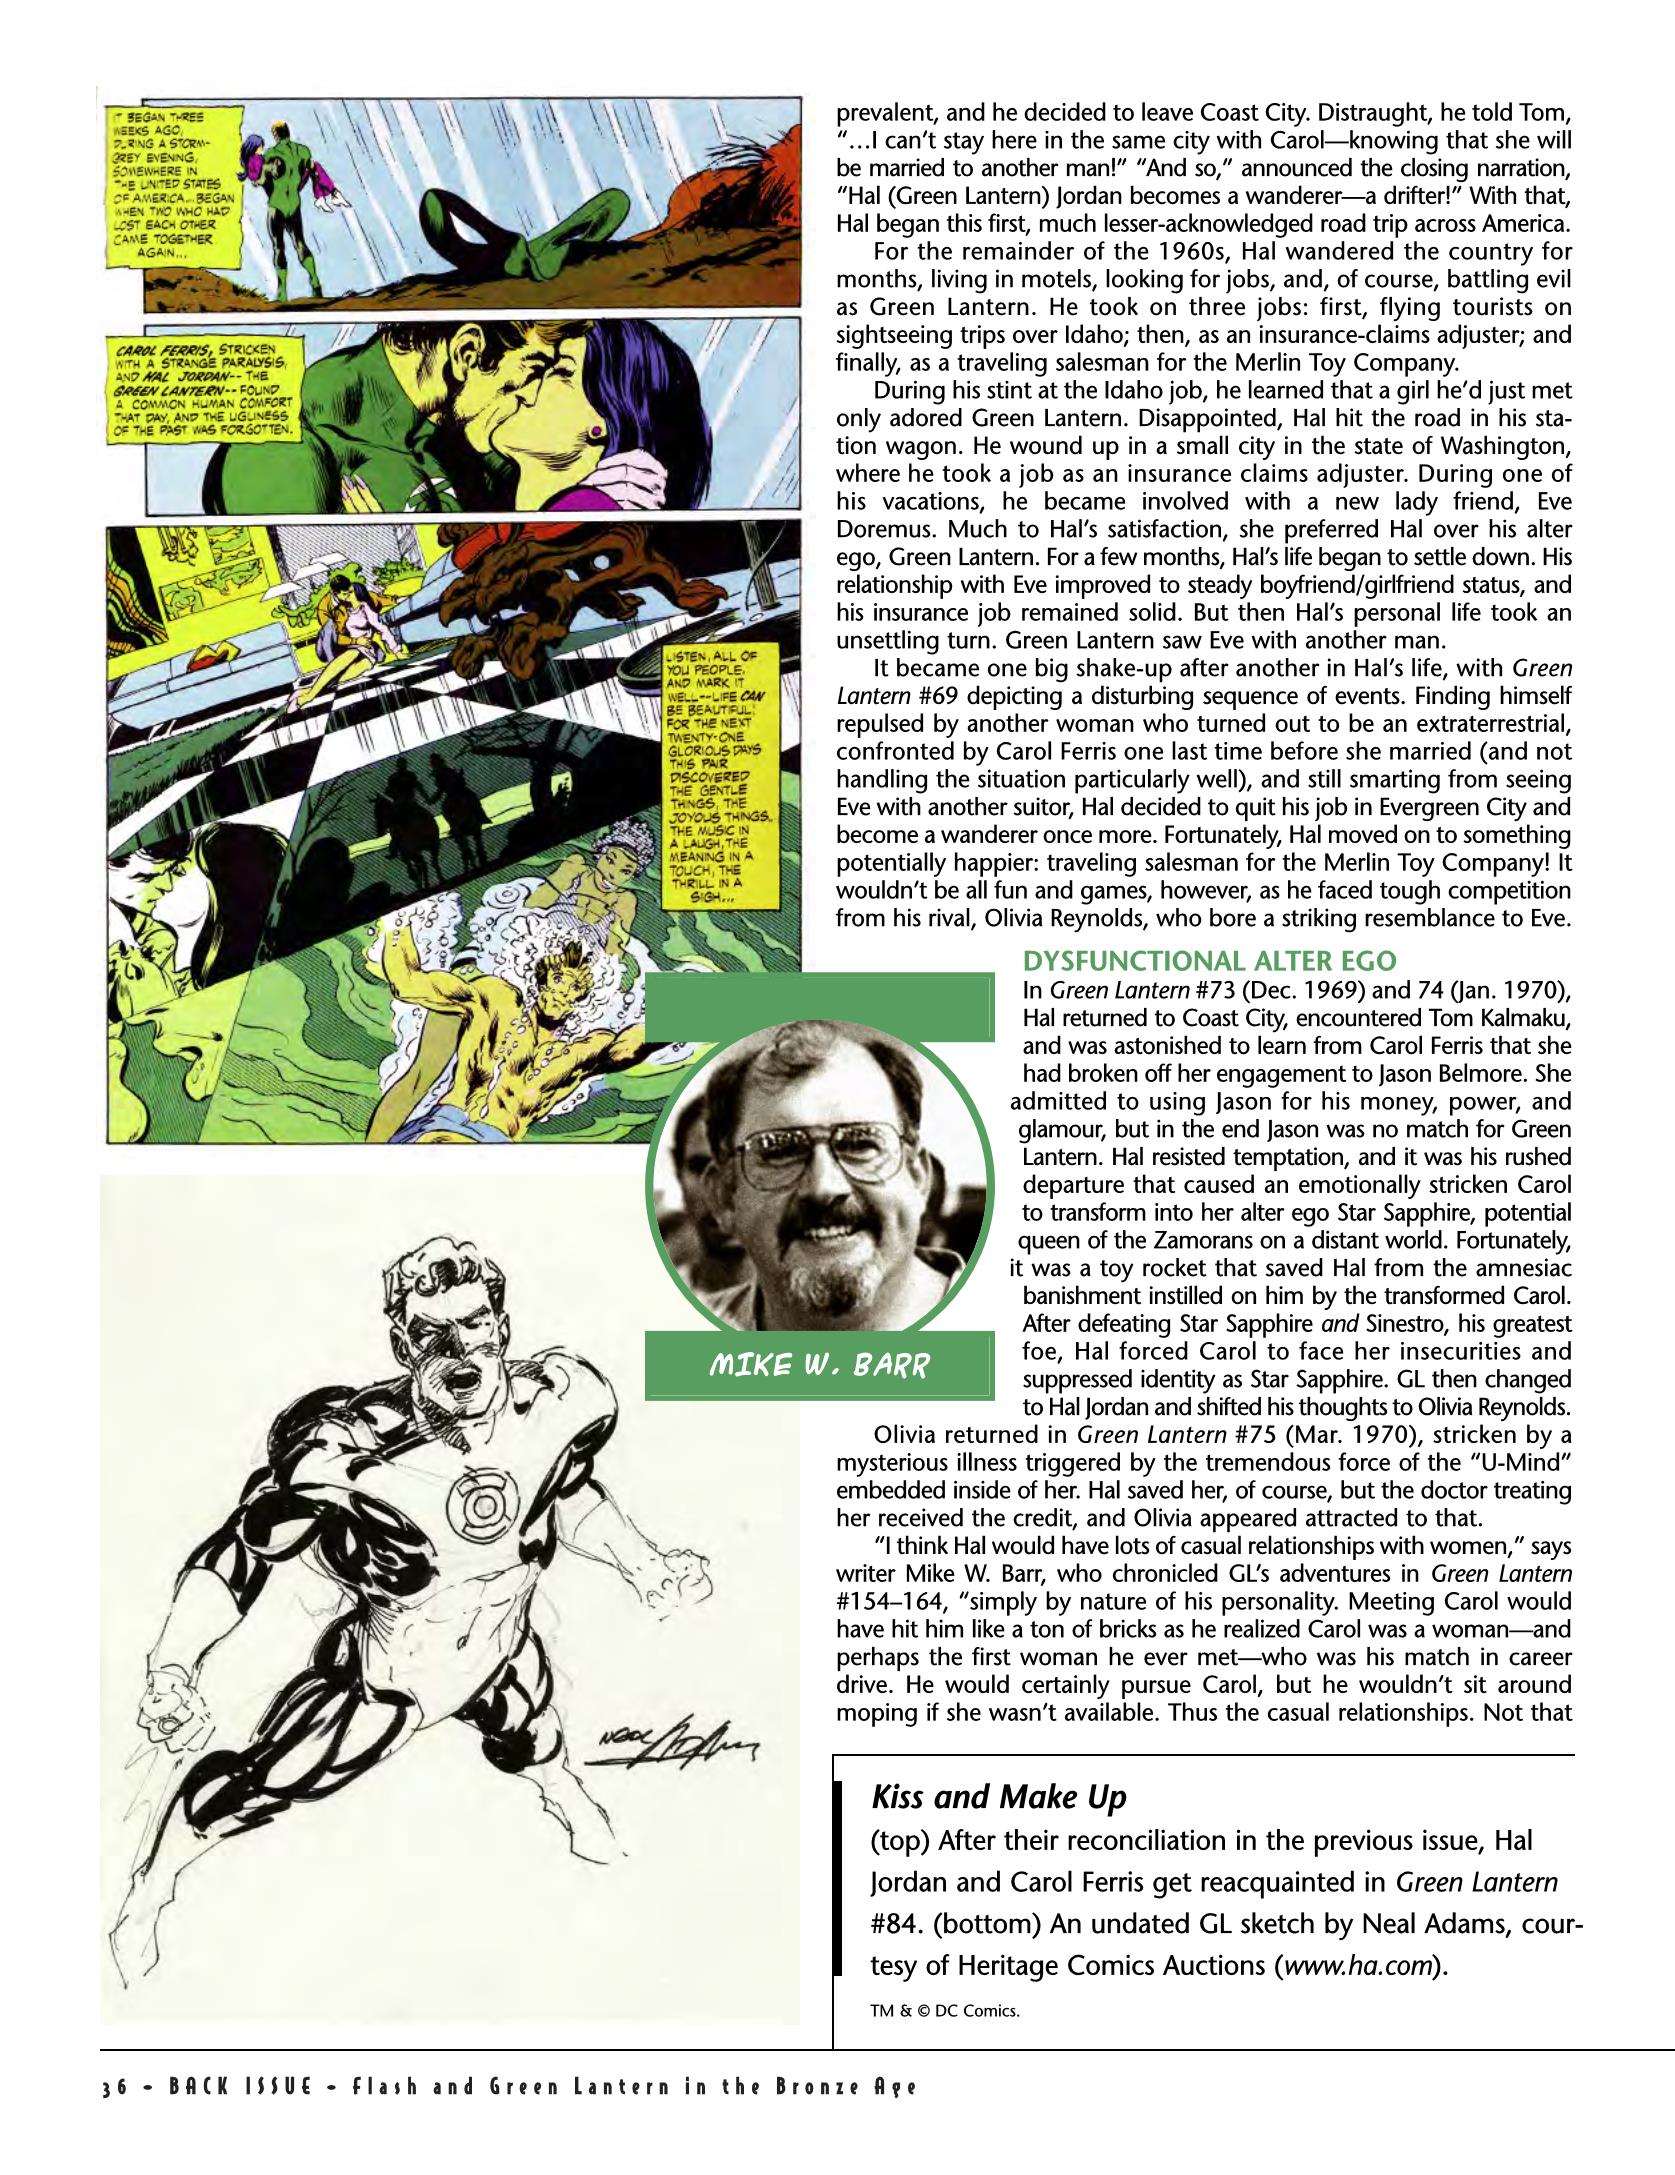 Read online Back Issue comic -  Issue #80 - 38